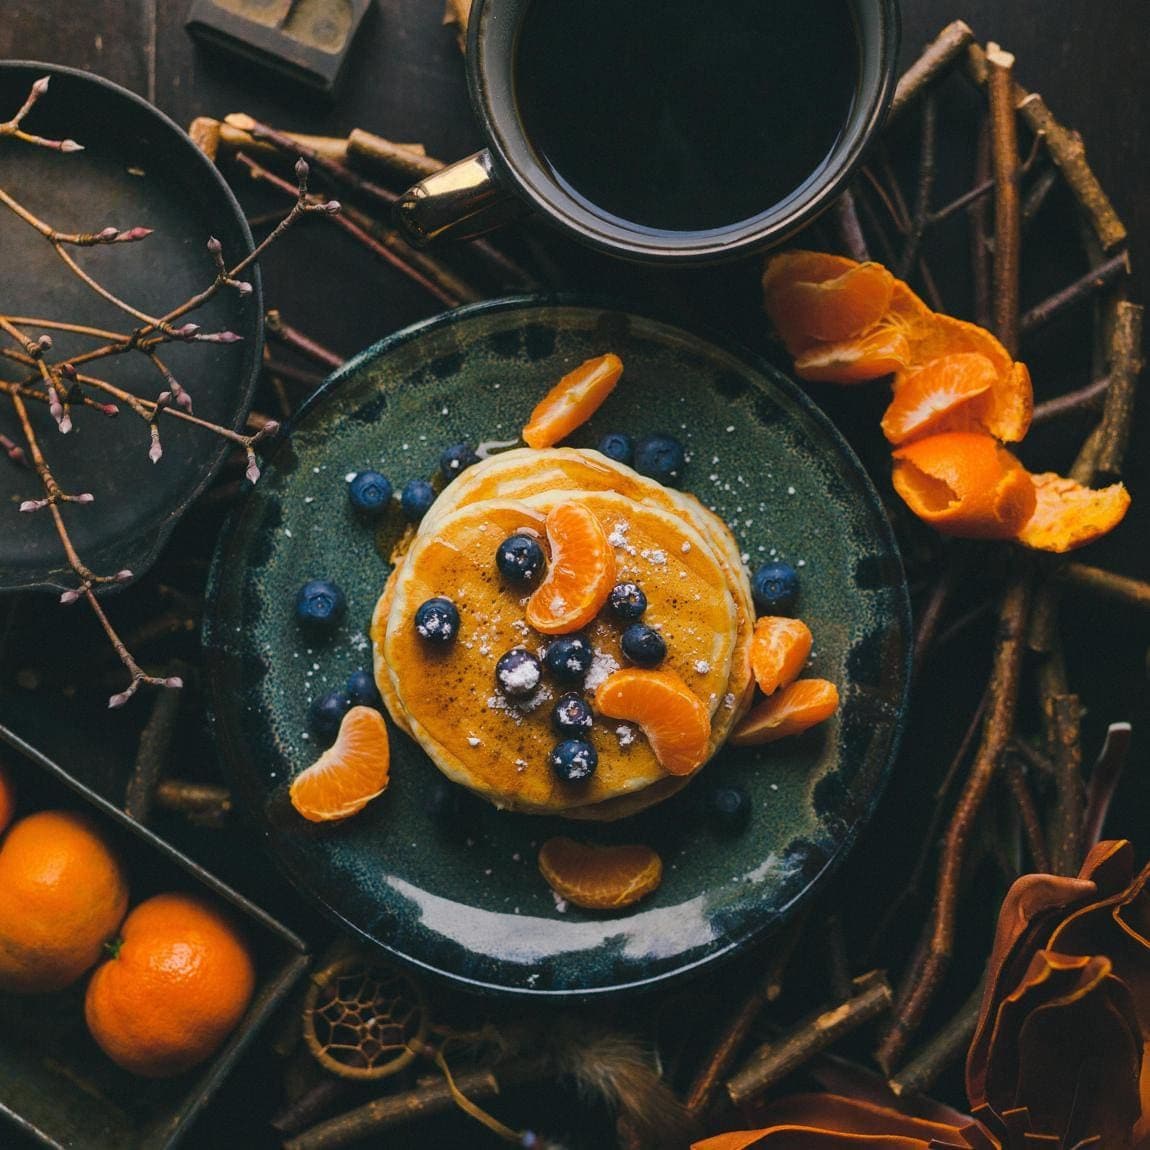 Plate of healthy pancakes with blueberries and tangerine